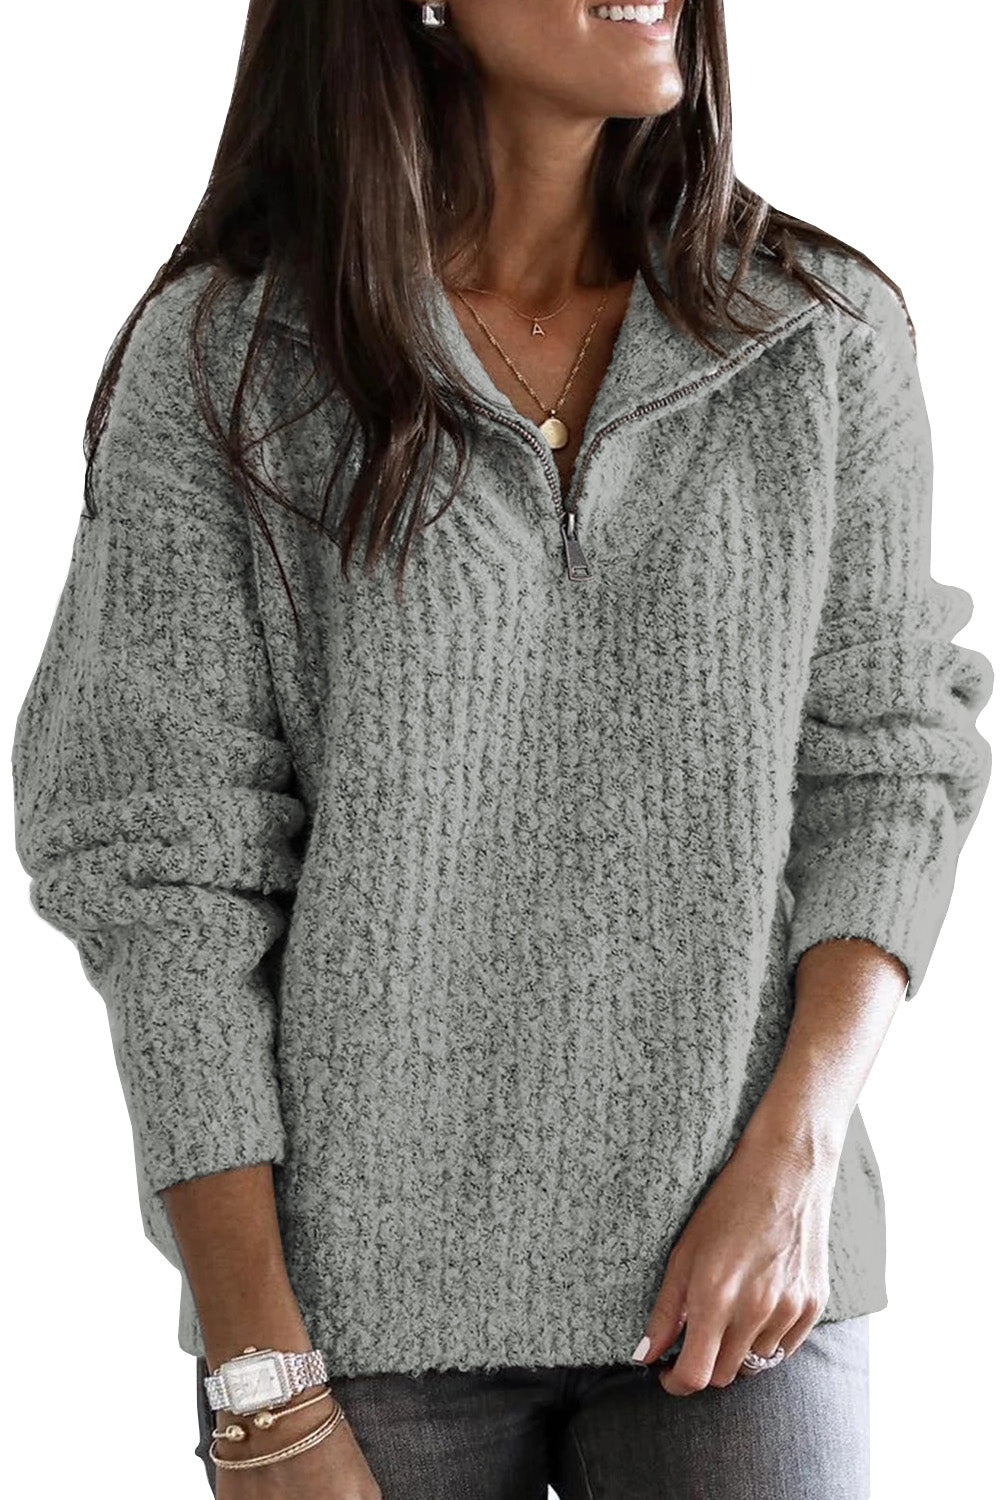 Women's Quarter Zip Collar Knitted Sweater Loose Fit Cozy Pullovers